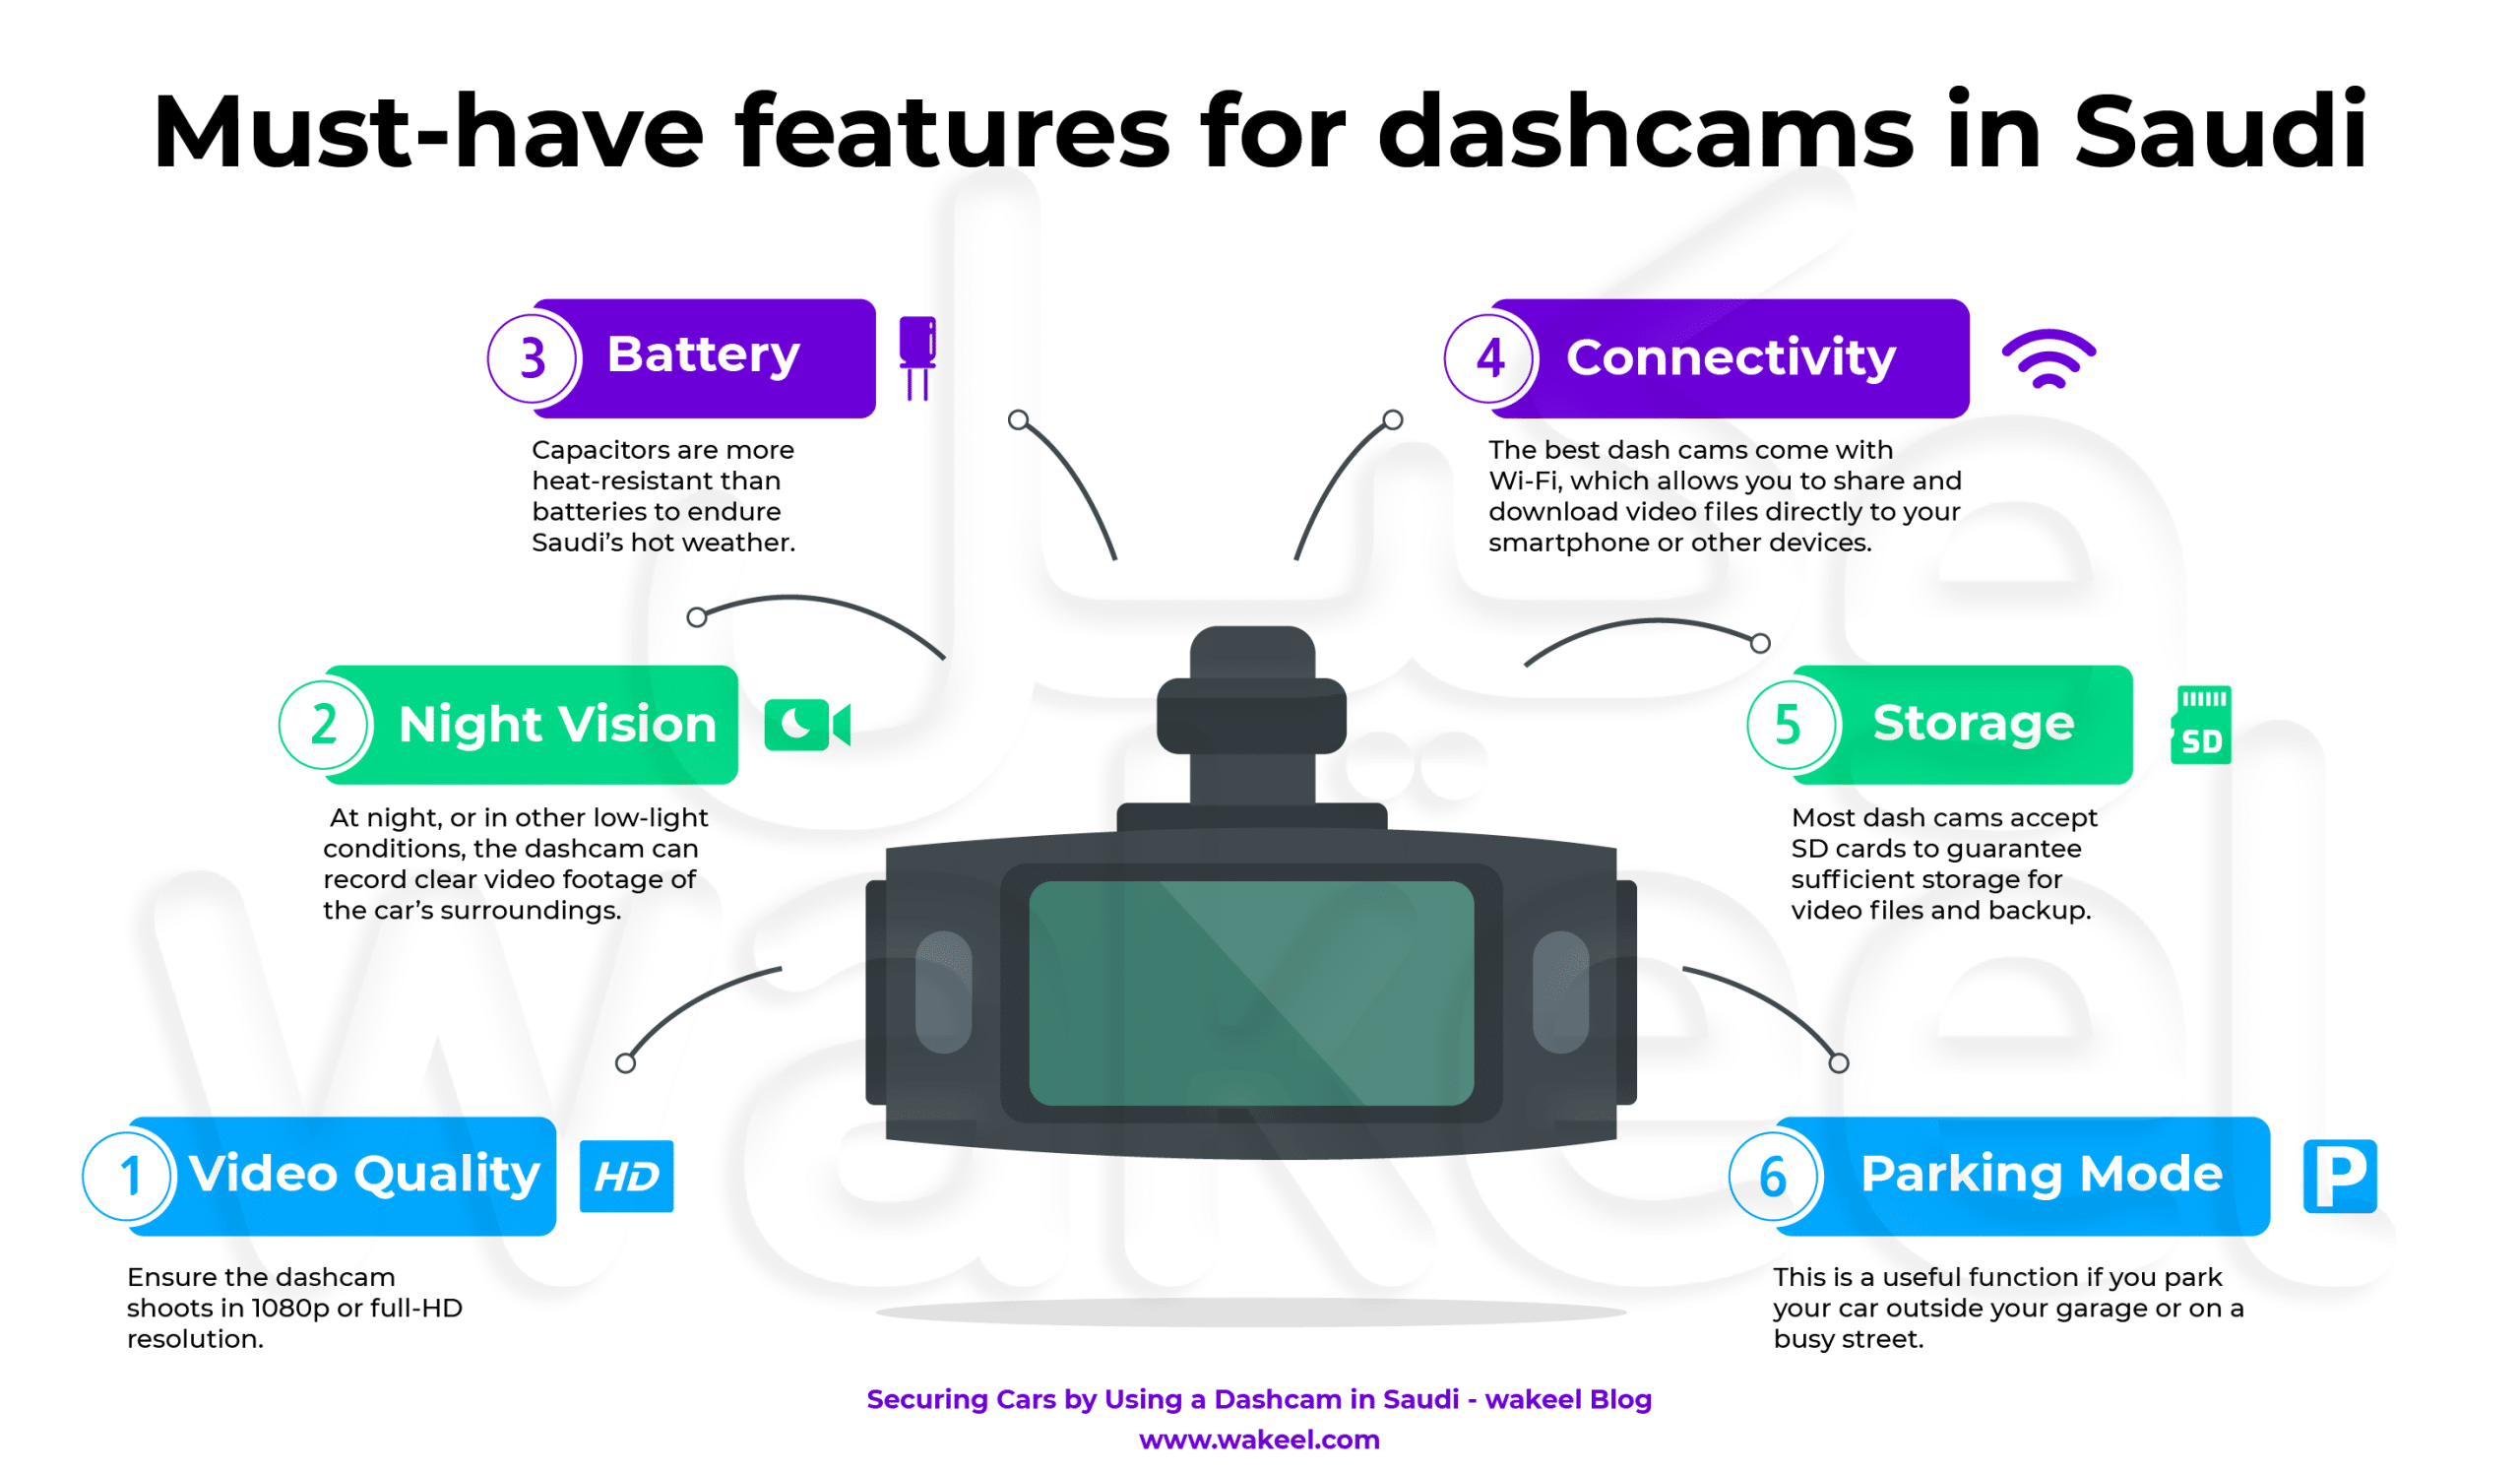 Infographic showing six must-have features for dashcams in Saudi Arabia: video quality, night vision, battery, connectivity, storage, and parking mode. Each feature is briefly described with an icon.